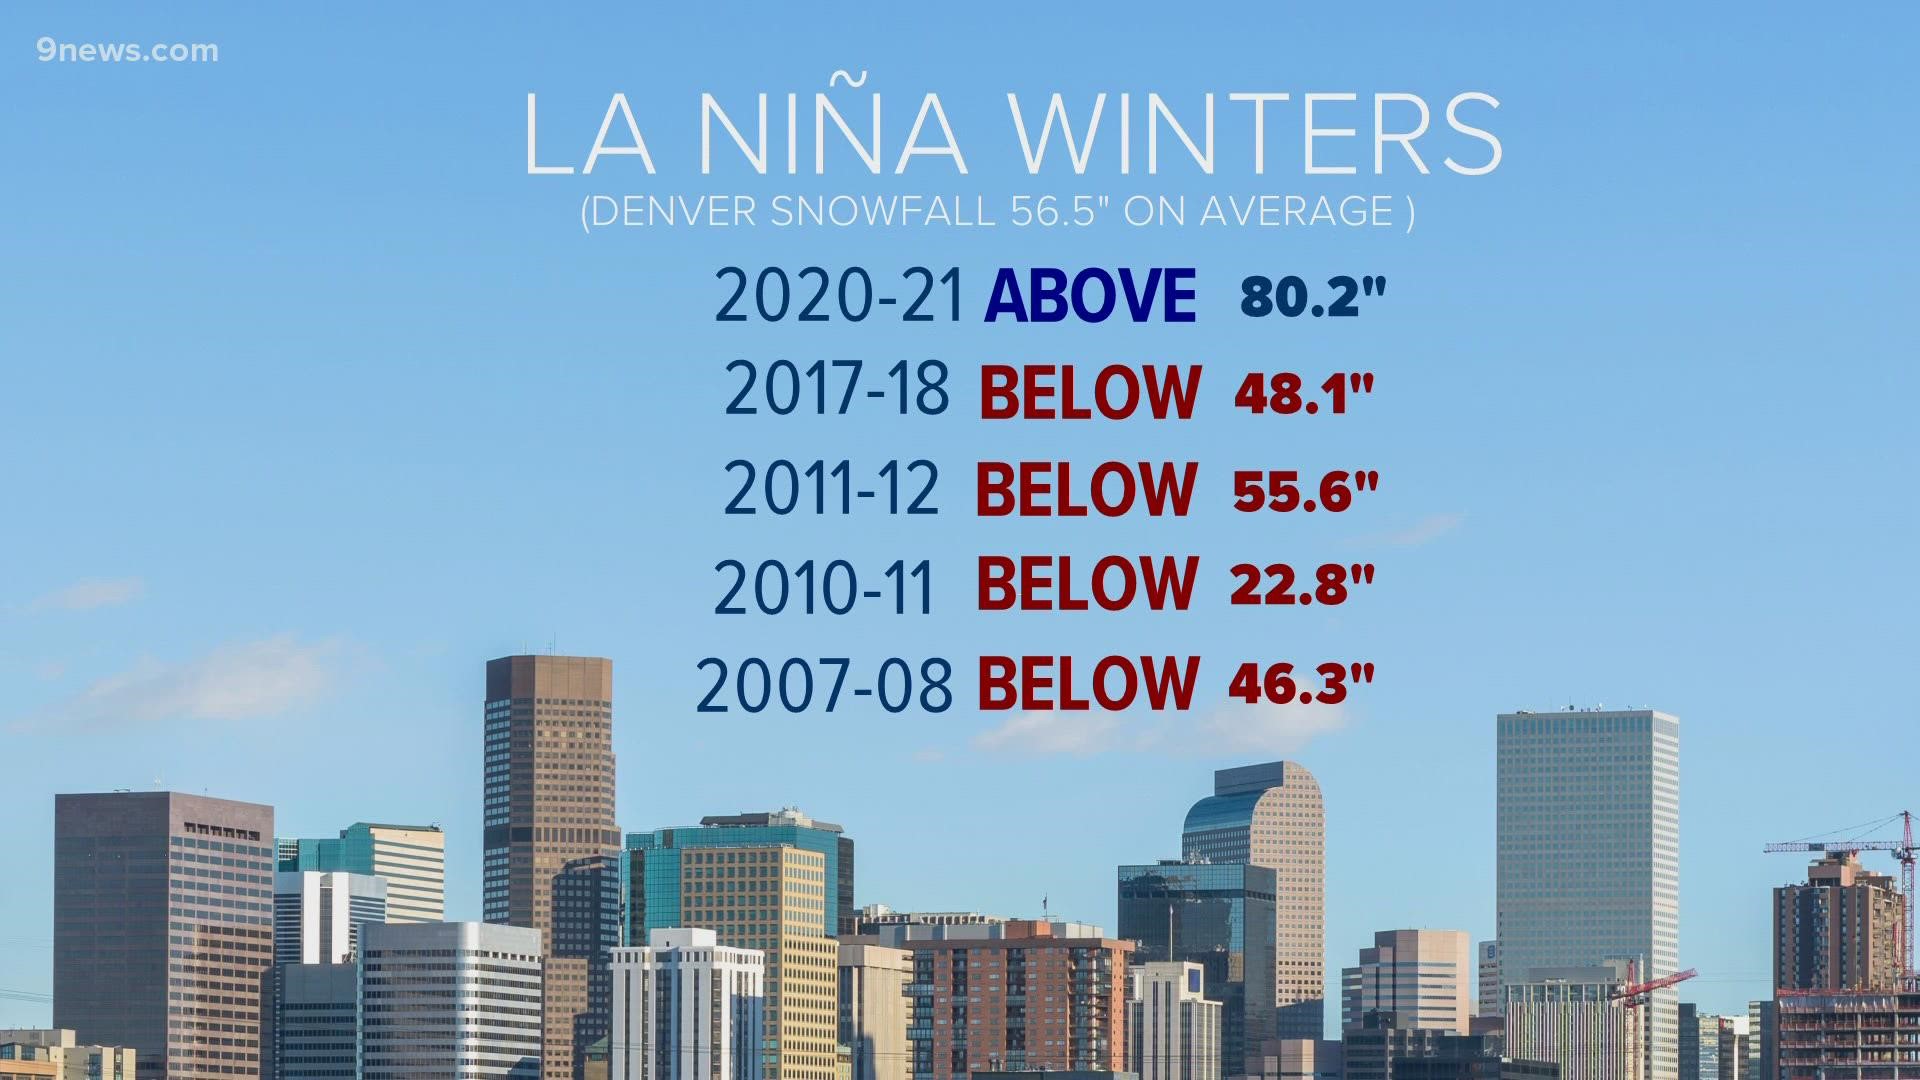 La Niña impacts vary across Colorado – the mountains see October snow, but lower elevations along front range are dry leading to a state wide dry spell in November.